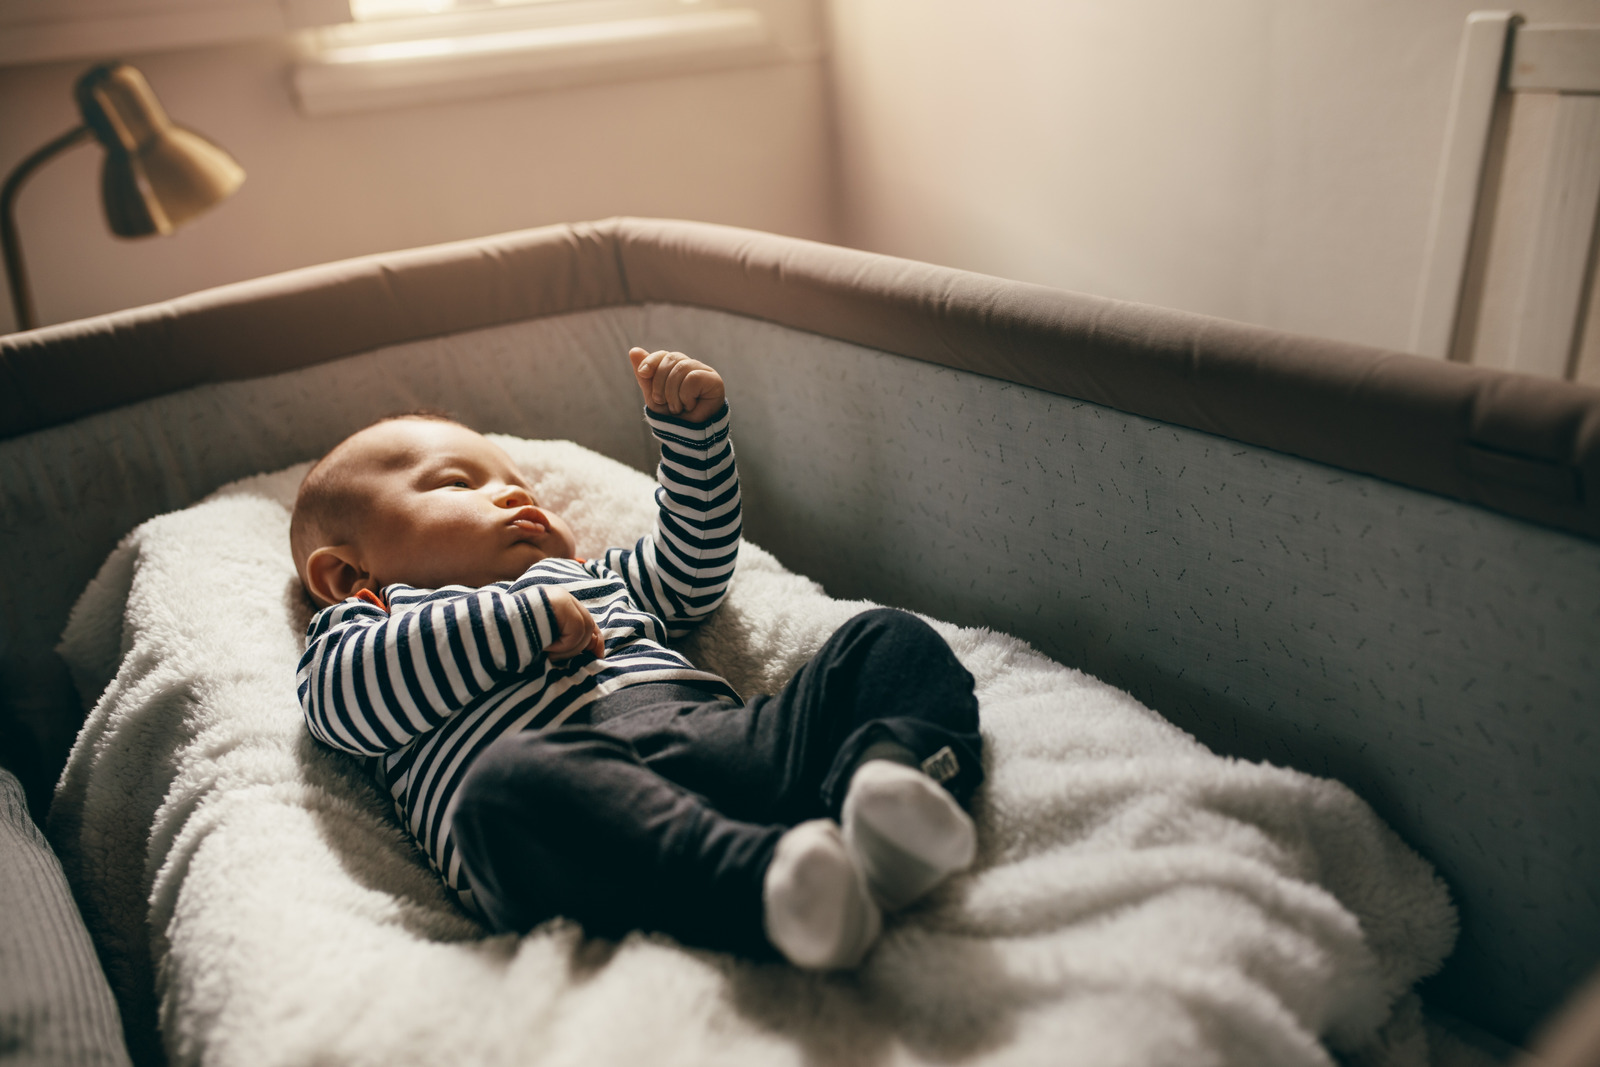 how to transition from bassinet to cot